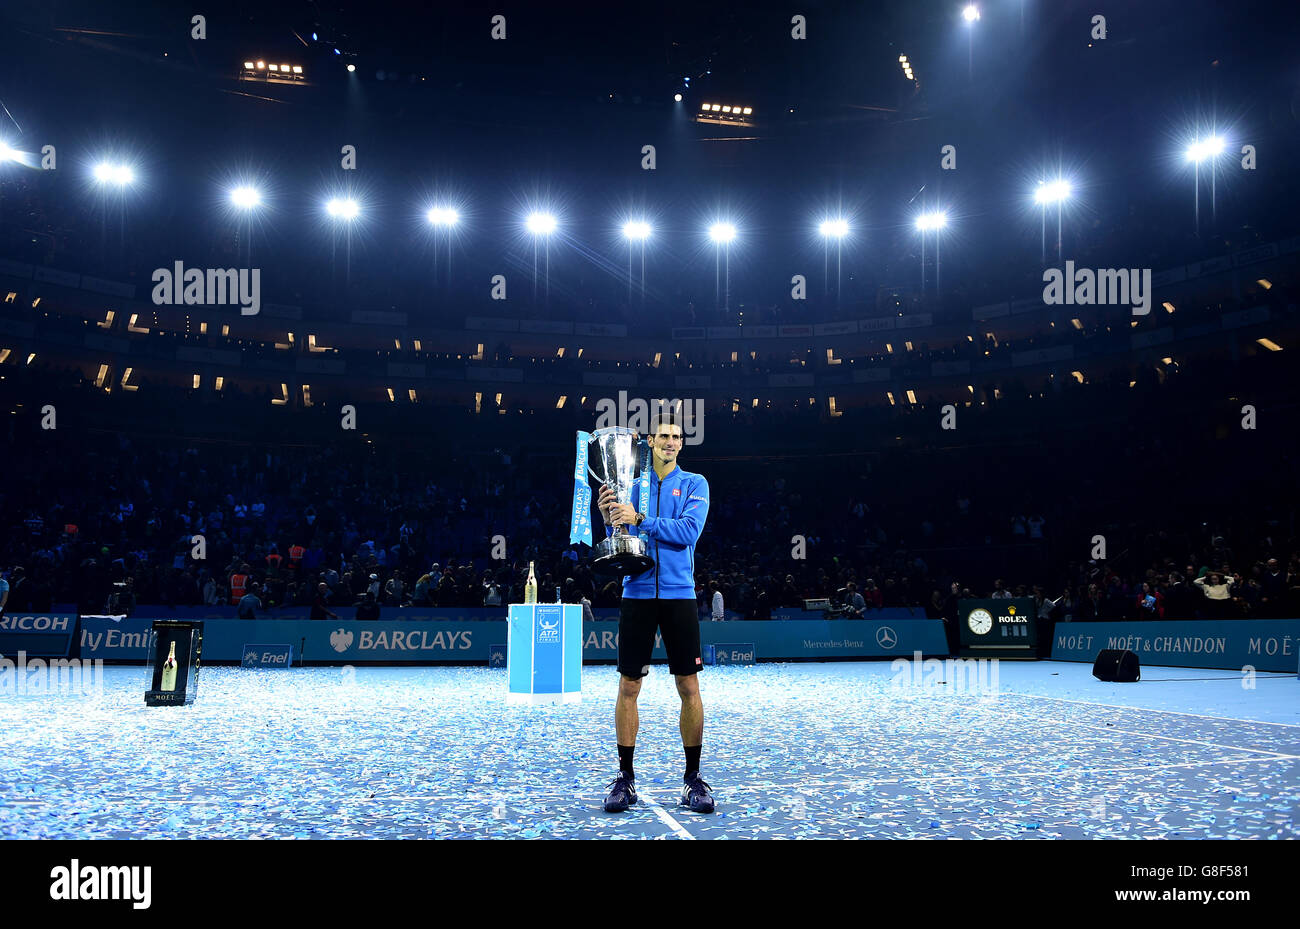 Serbia's Novak Djokovic celebrates winning the Final of the ATP World Tour Finals at the O2 Arena, London. PRESS ASSSOCIATION Photo. Picture date: Sunday November 22, 2015. See PA story TENNIS London. Photo credit should read: Adam Davy/PA Wire. RESTRICTIONS: , No commercial use without prior permission, please contact PA Images for further information: Tel: +44 (0) 115 8447447. Stock Photo